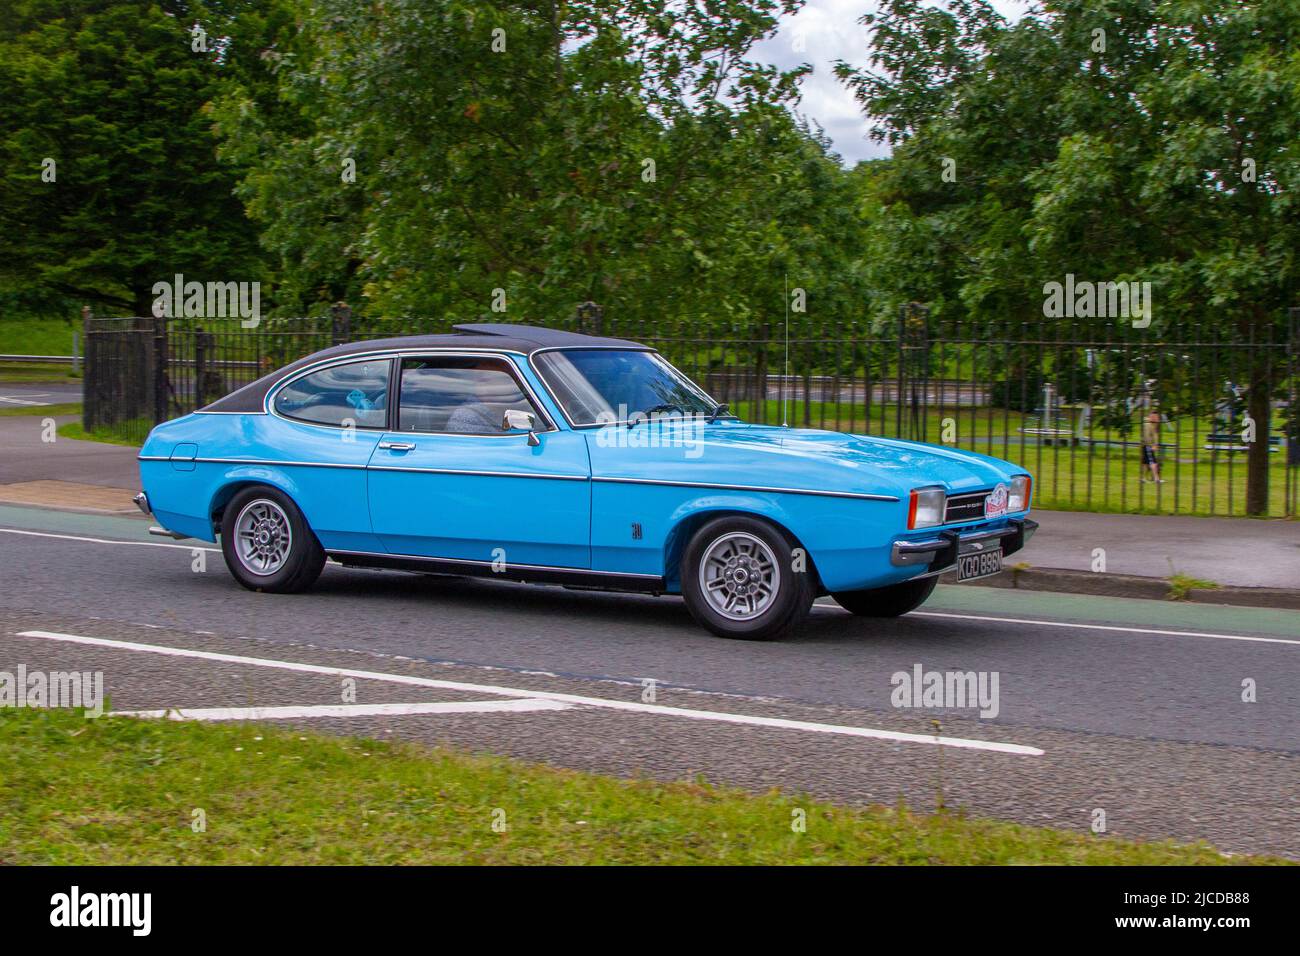 1975 70s seventies blue Ford Capri 2994cc petrol; automobiles featured during the 58th year of the Manchester to Blackpool Touring Assembly for Veteran, Vintage, Classic and Cherished cars. Stock Photo